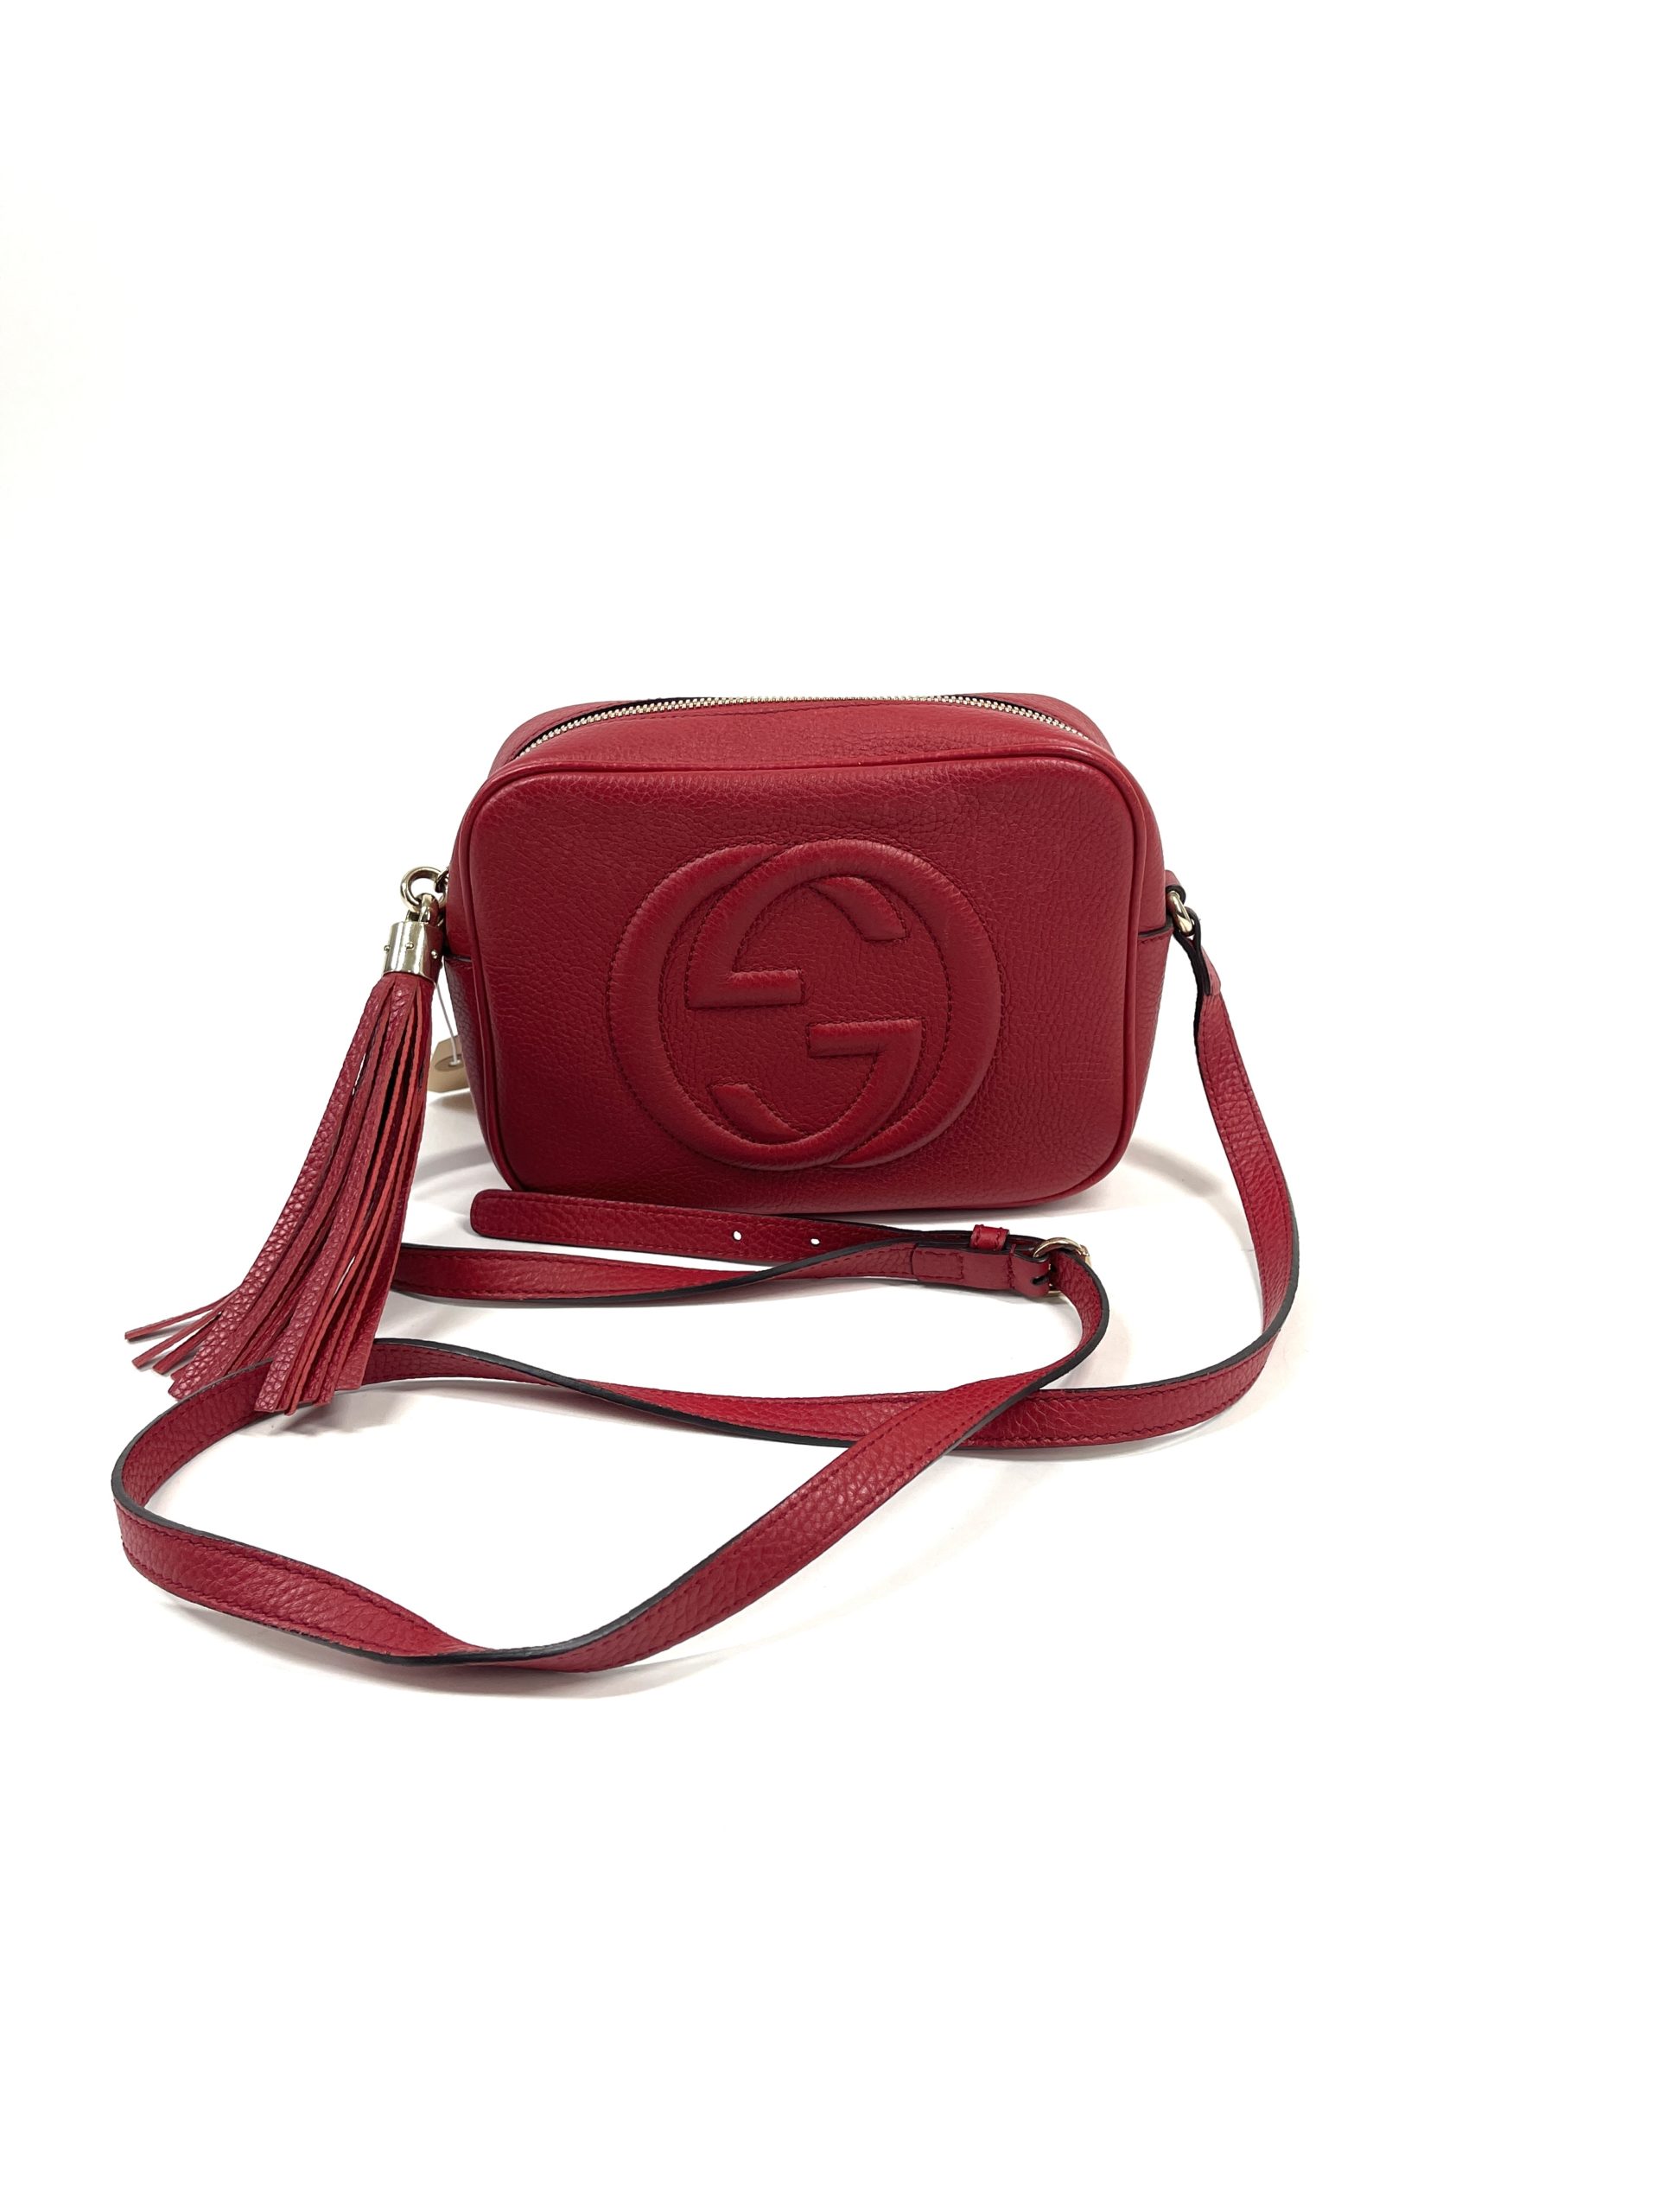 Gucci Soho Red Leather Disco Bag Crossbody - A World Of Goods For You, LLC